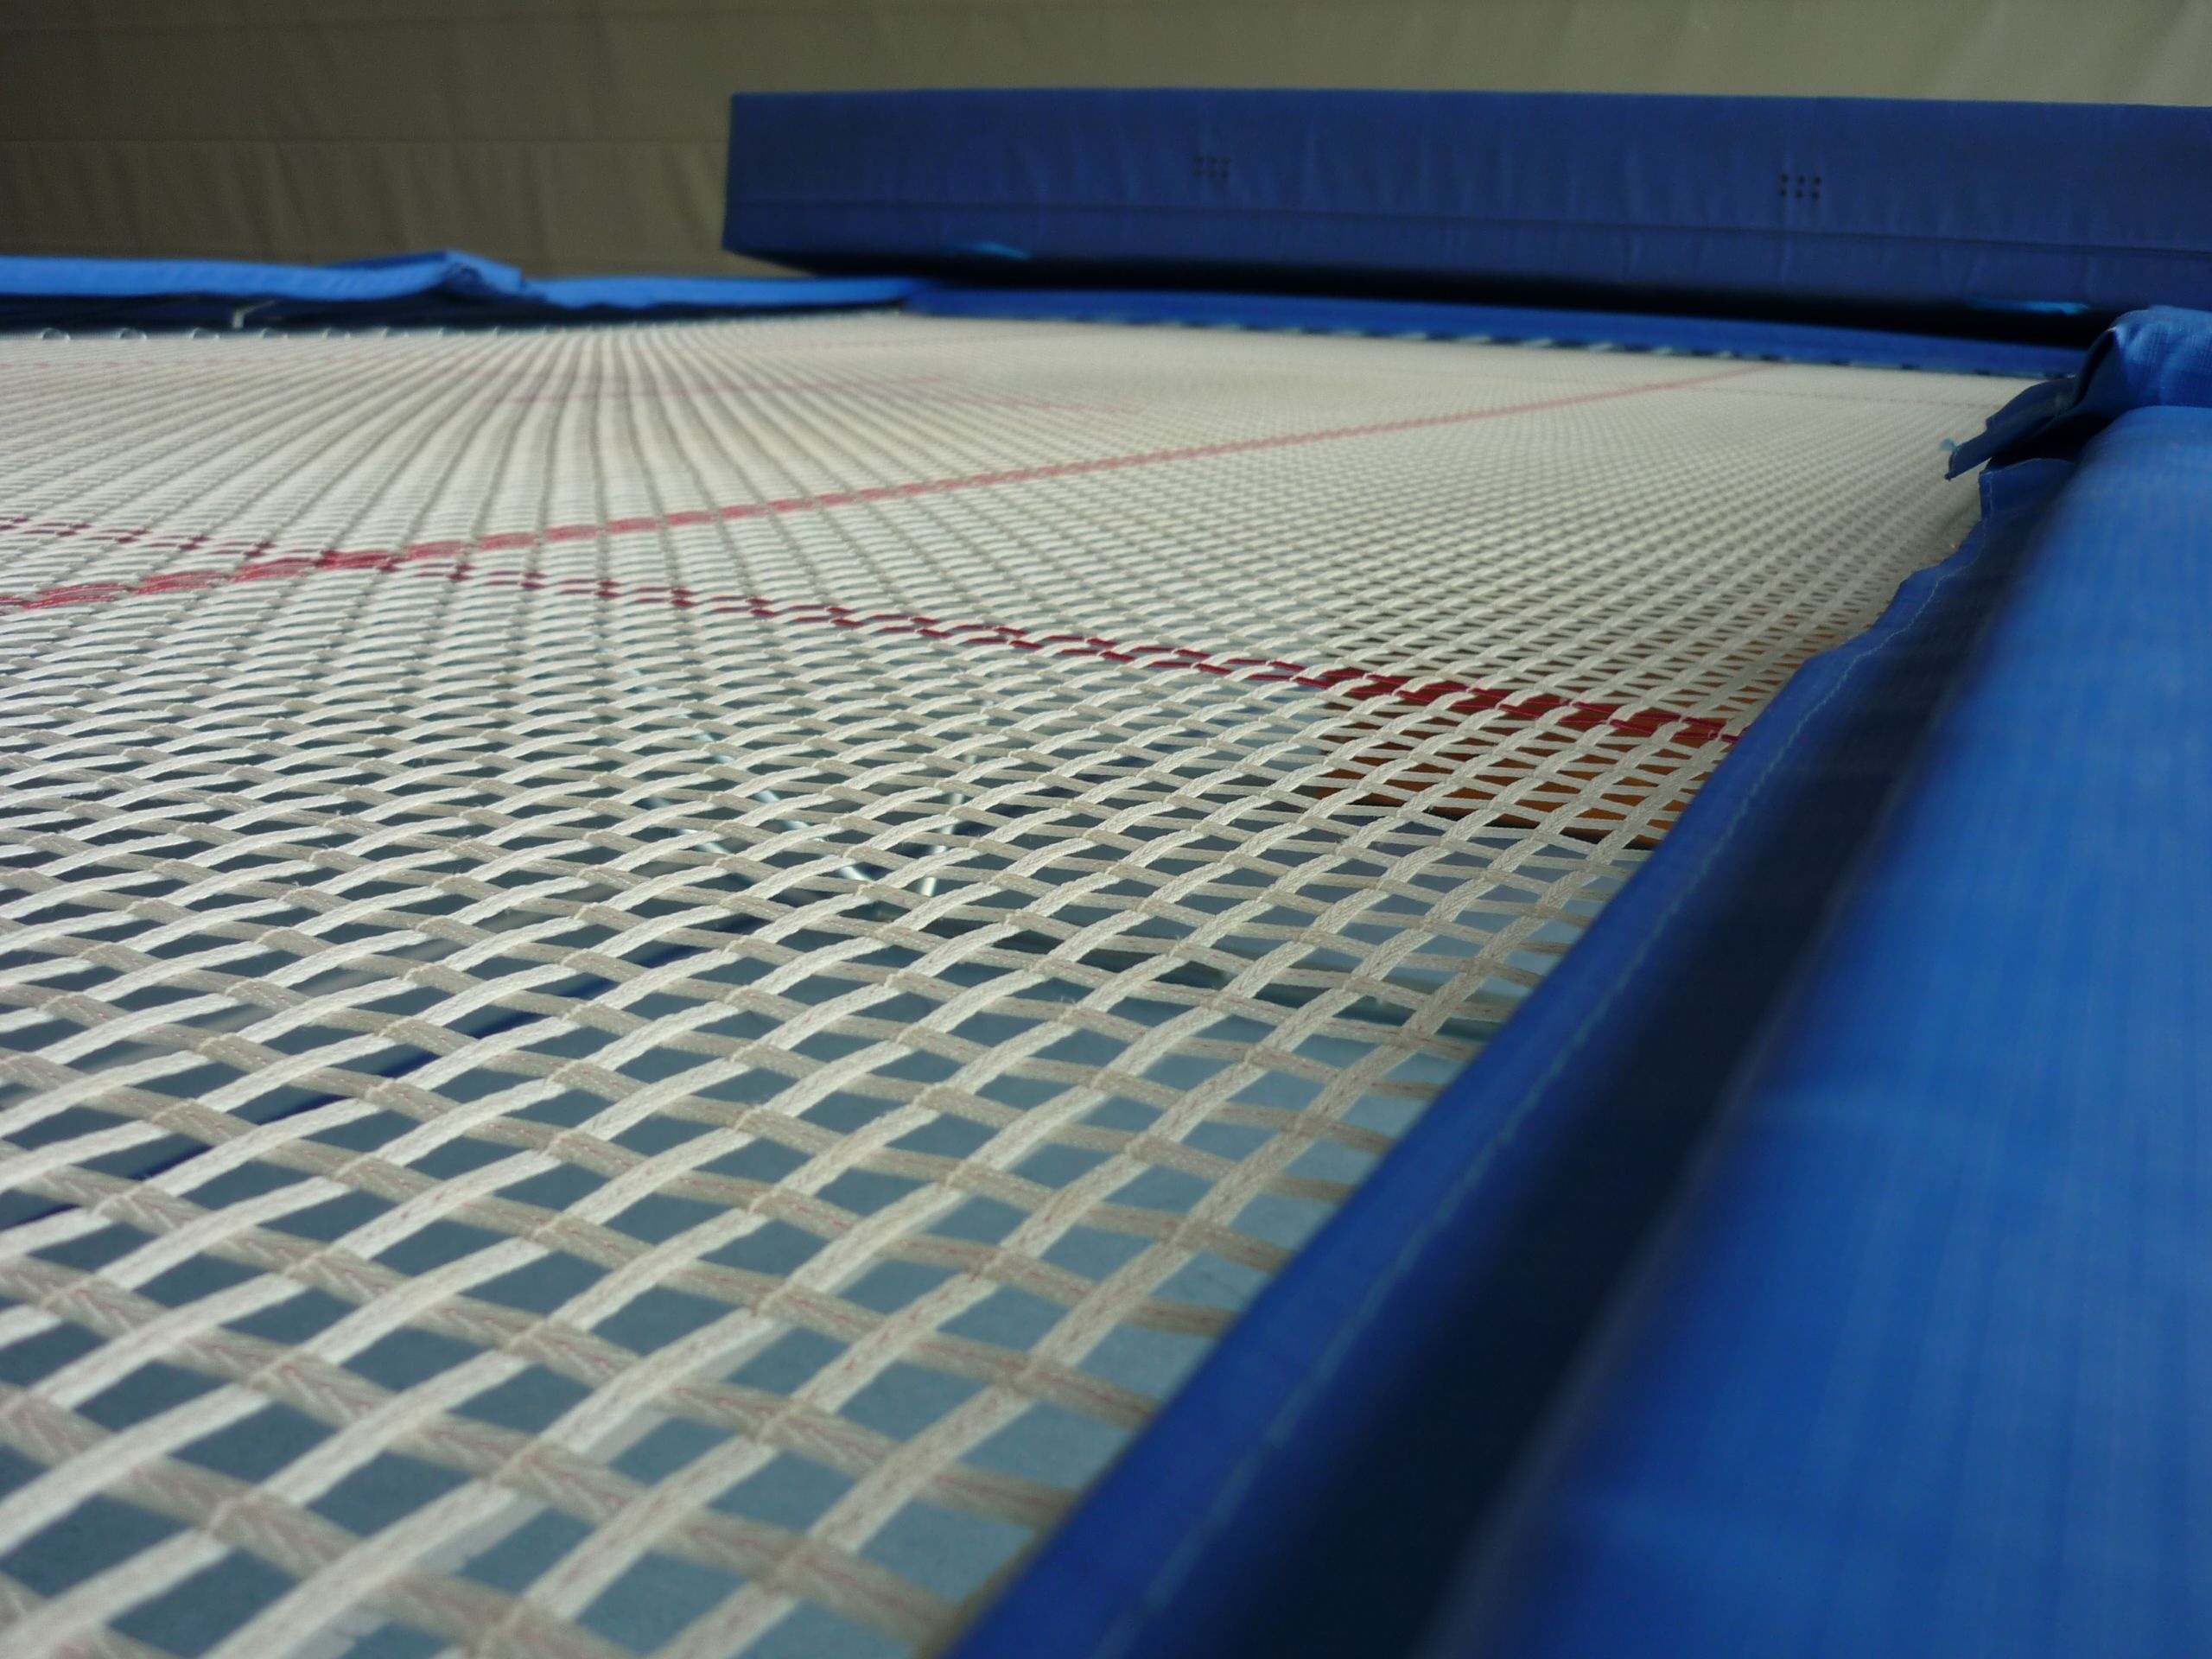 Trampoline gymnastics: A sports device consisting of a piece of taut, strong fabric stretched between a steel frame using many coiled springs. 2560x1920 HD Background.